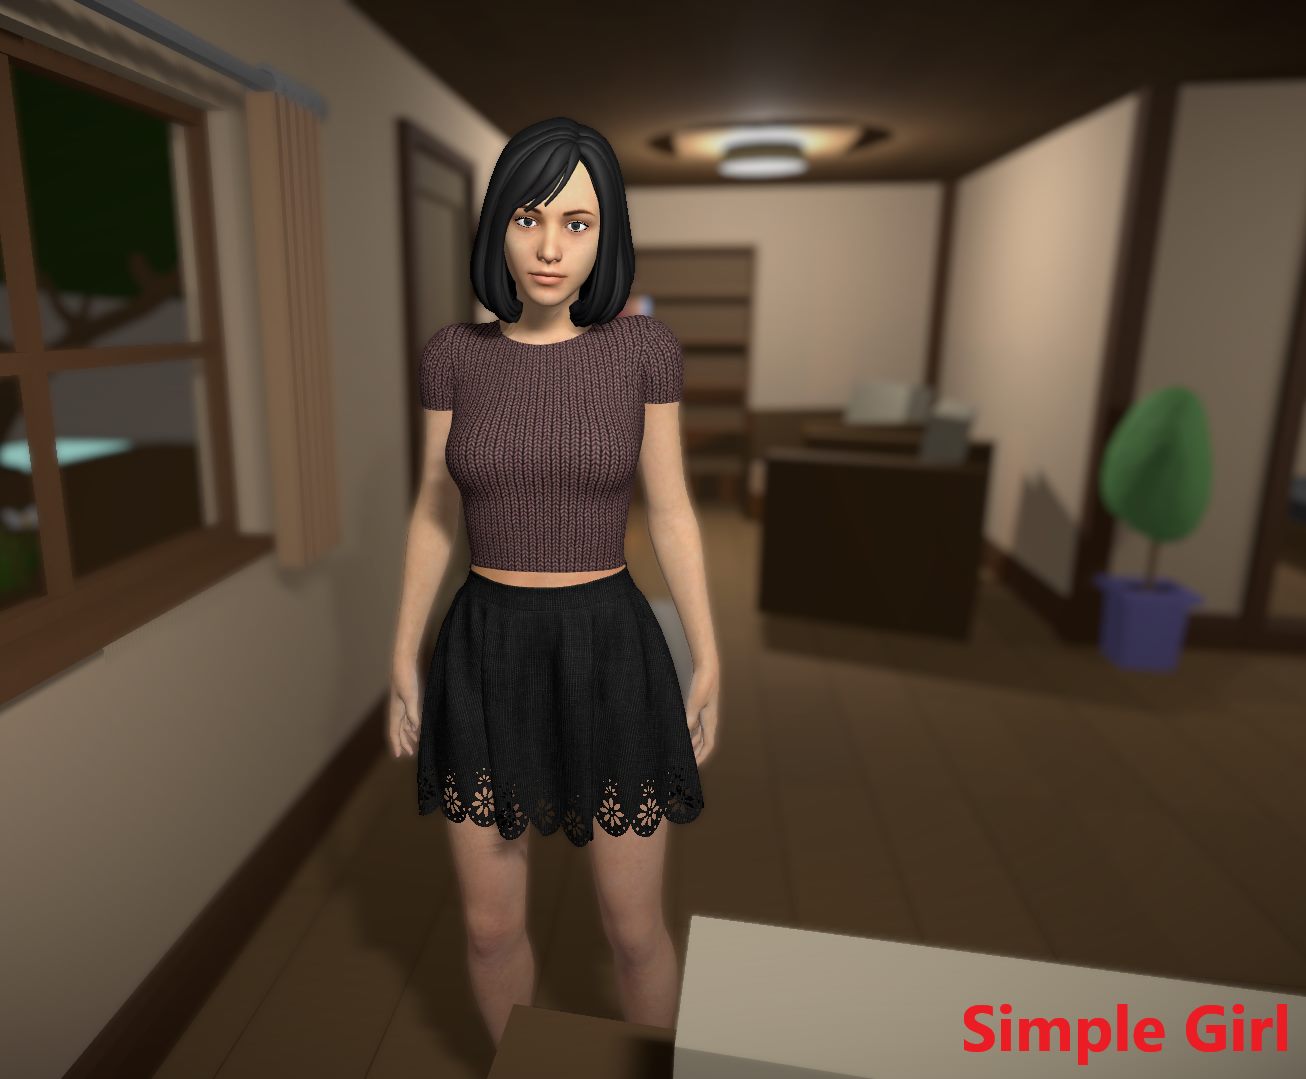 Simple Girls Xxx Sex - Simple Girl Unity Porn Sex Game v.1.39 Download for Windows, Android